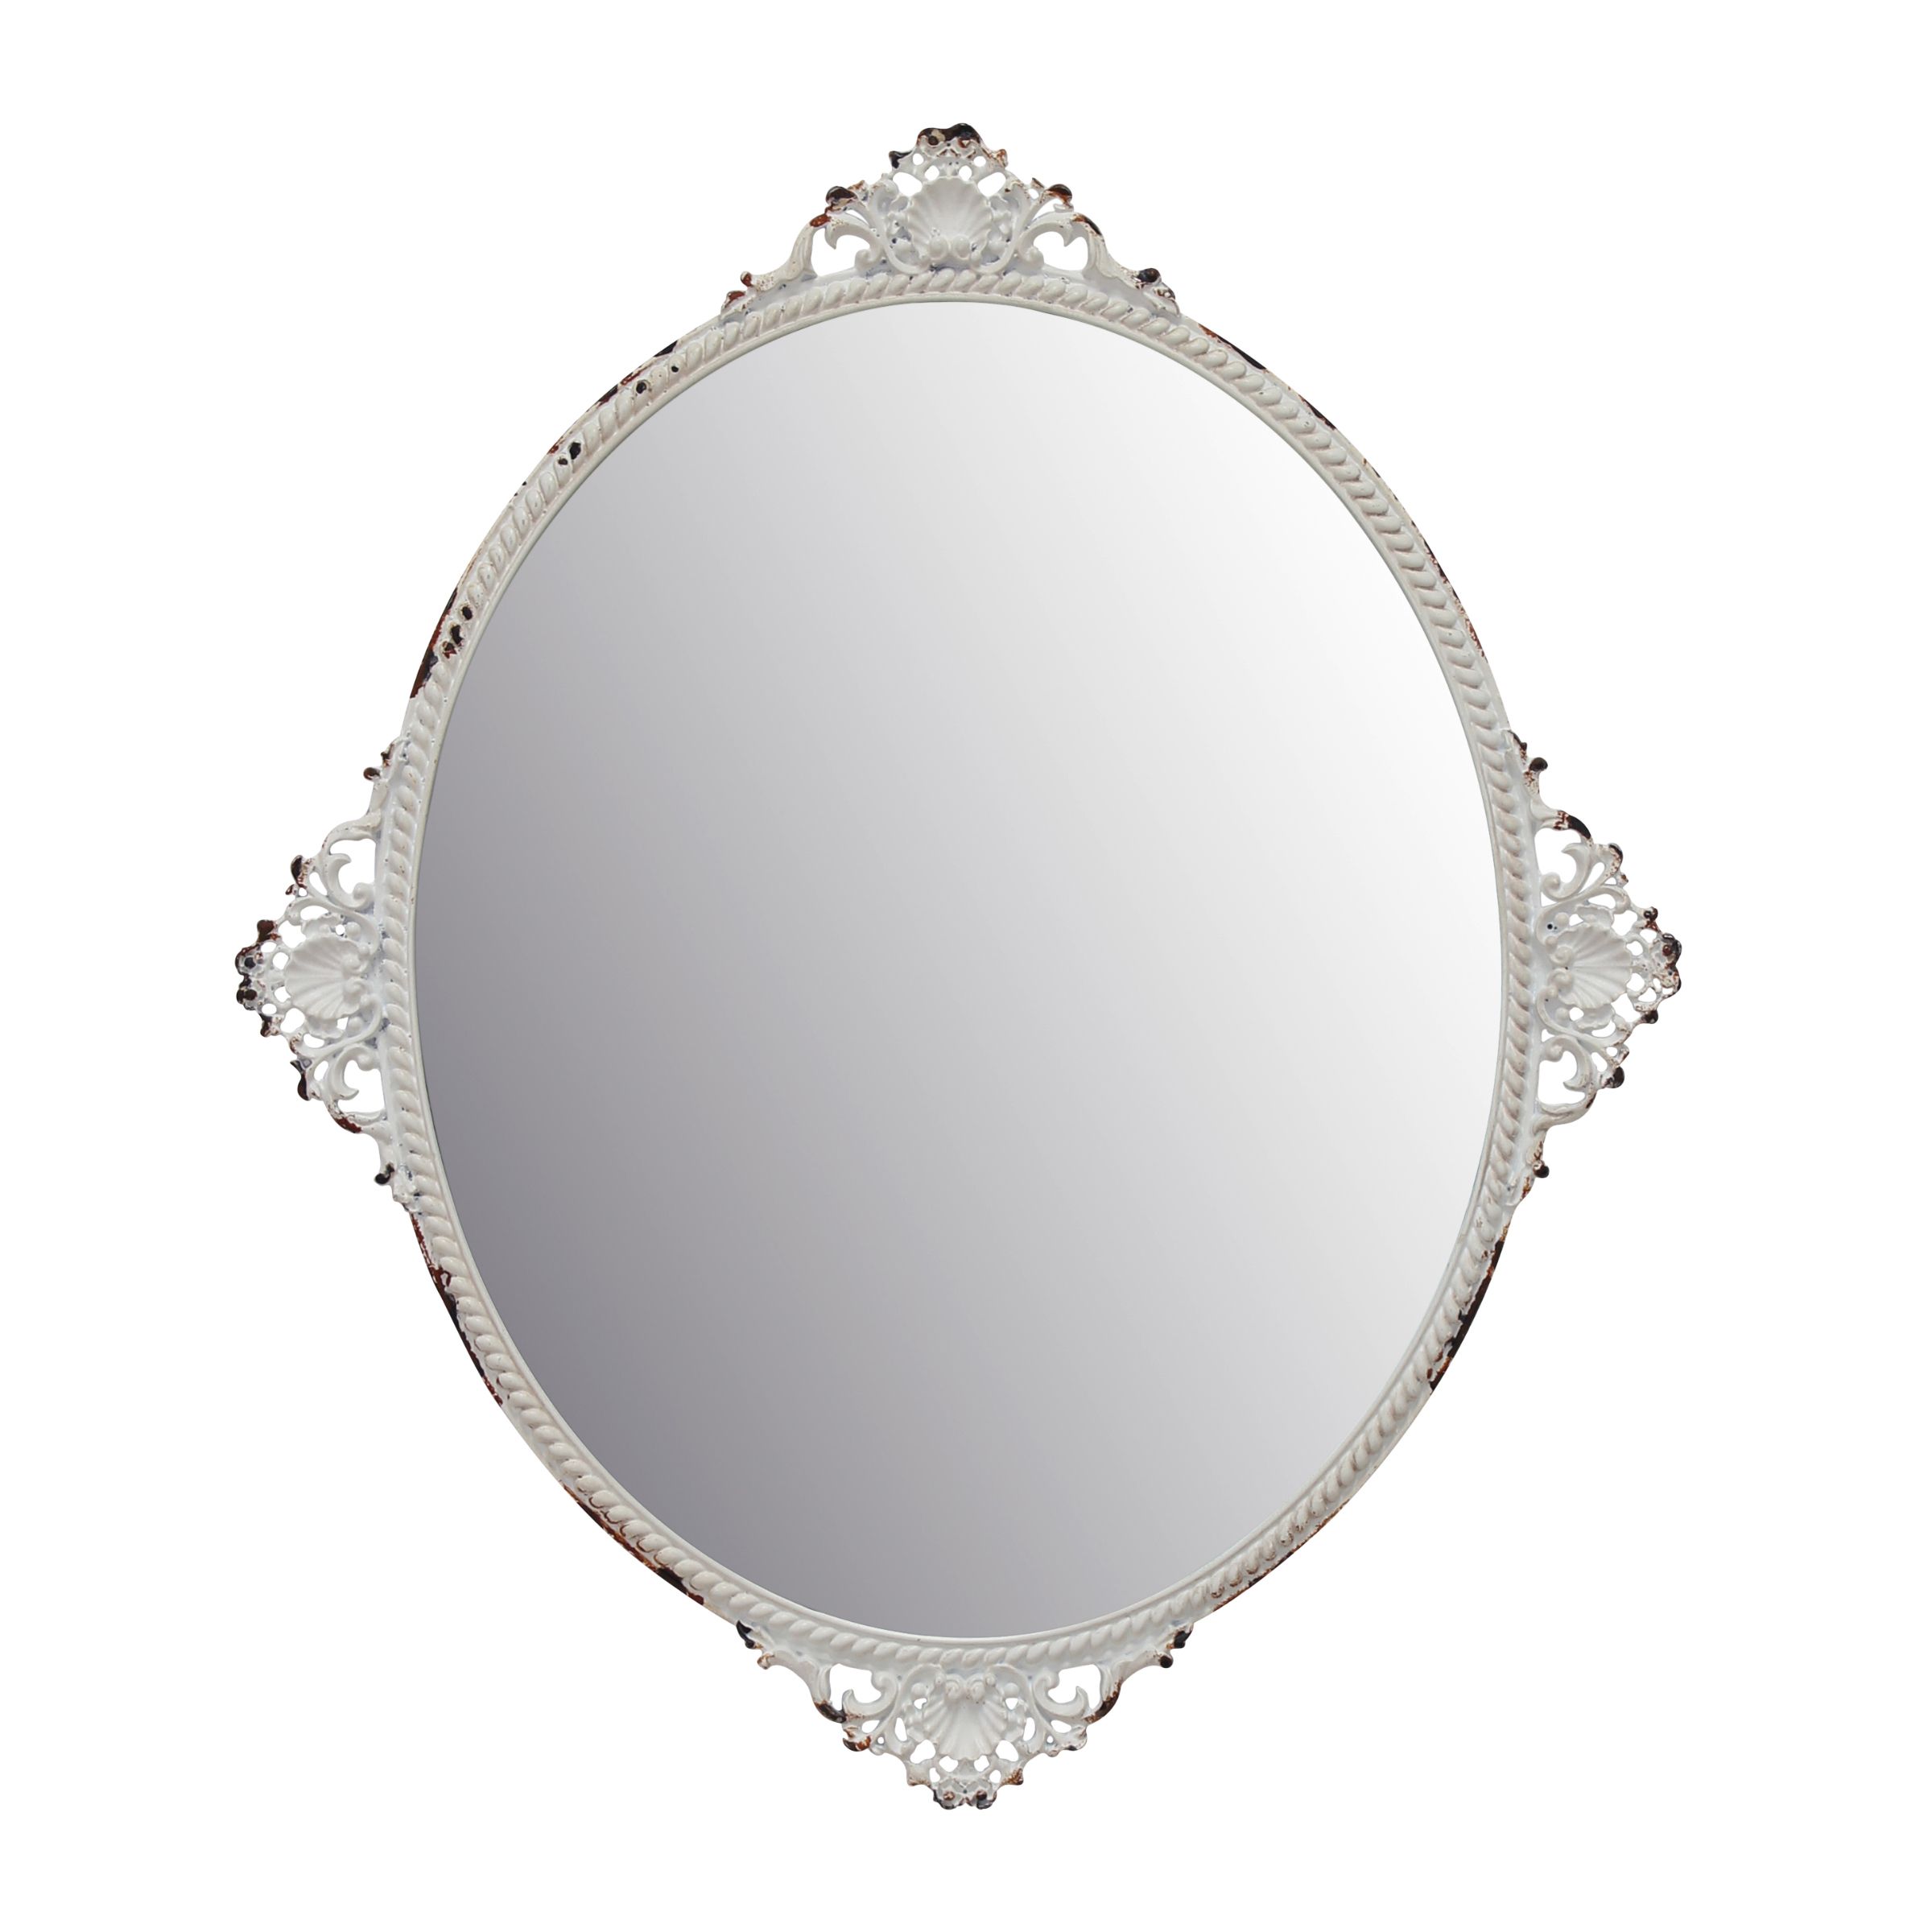 Oval Wall Rustic Mirror With Worn White Vintage Metal Decorative With Regard To Lajoie Rustic Accent Mirrors (Photo 13 of 15)